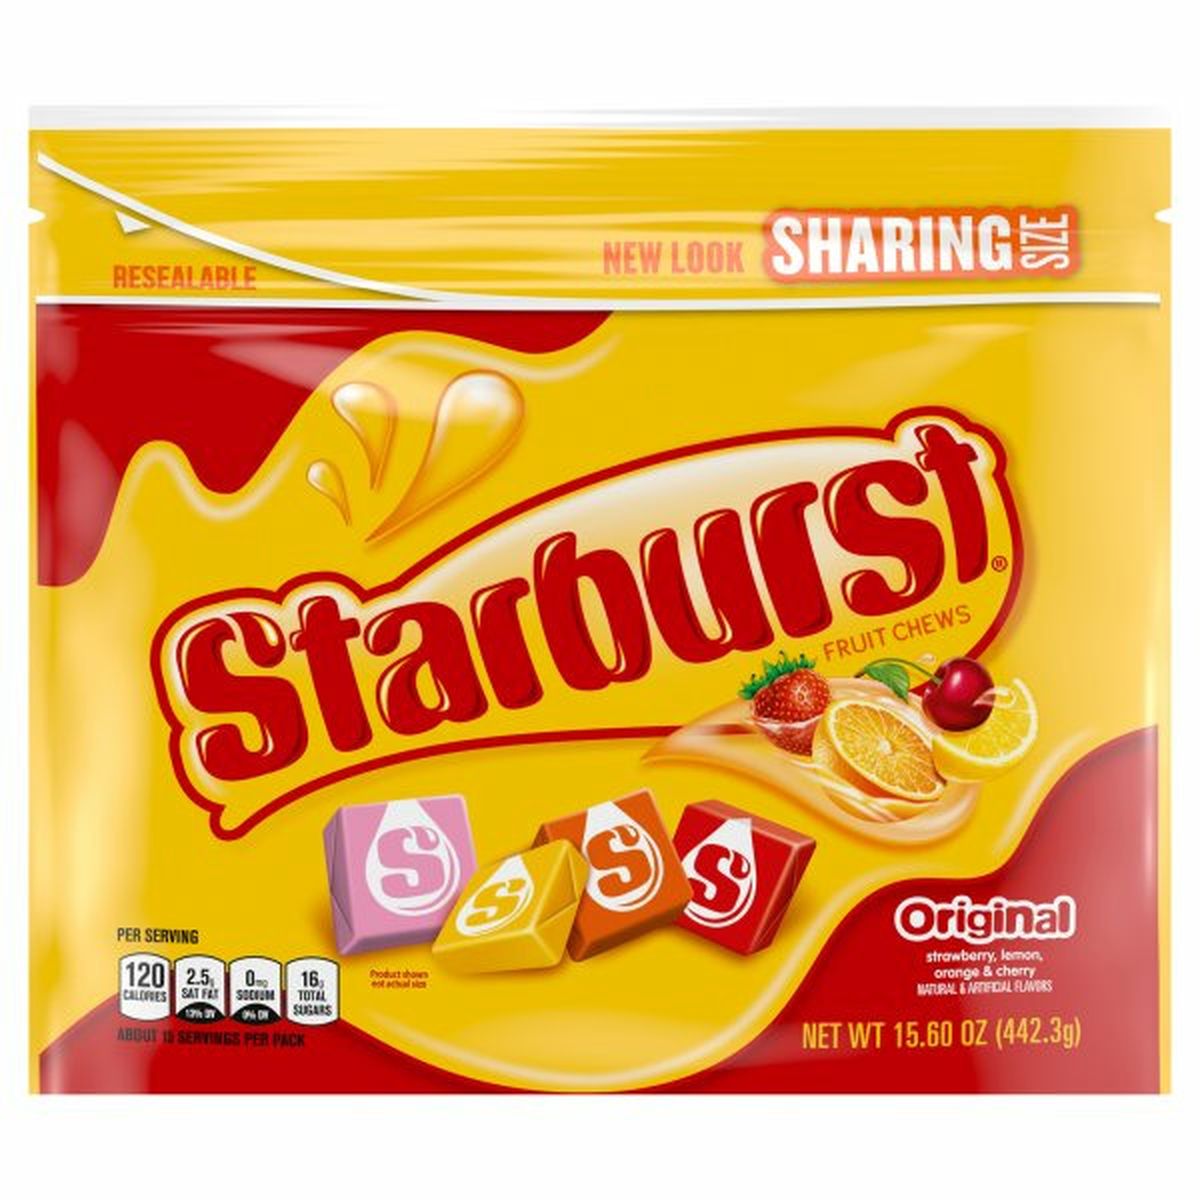 Calories in Starburst Original Chewy Candy Stand Up Pouch